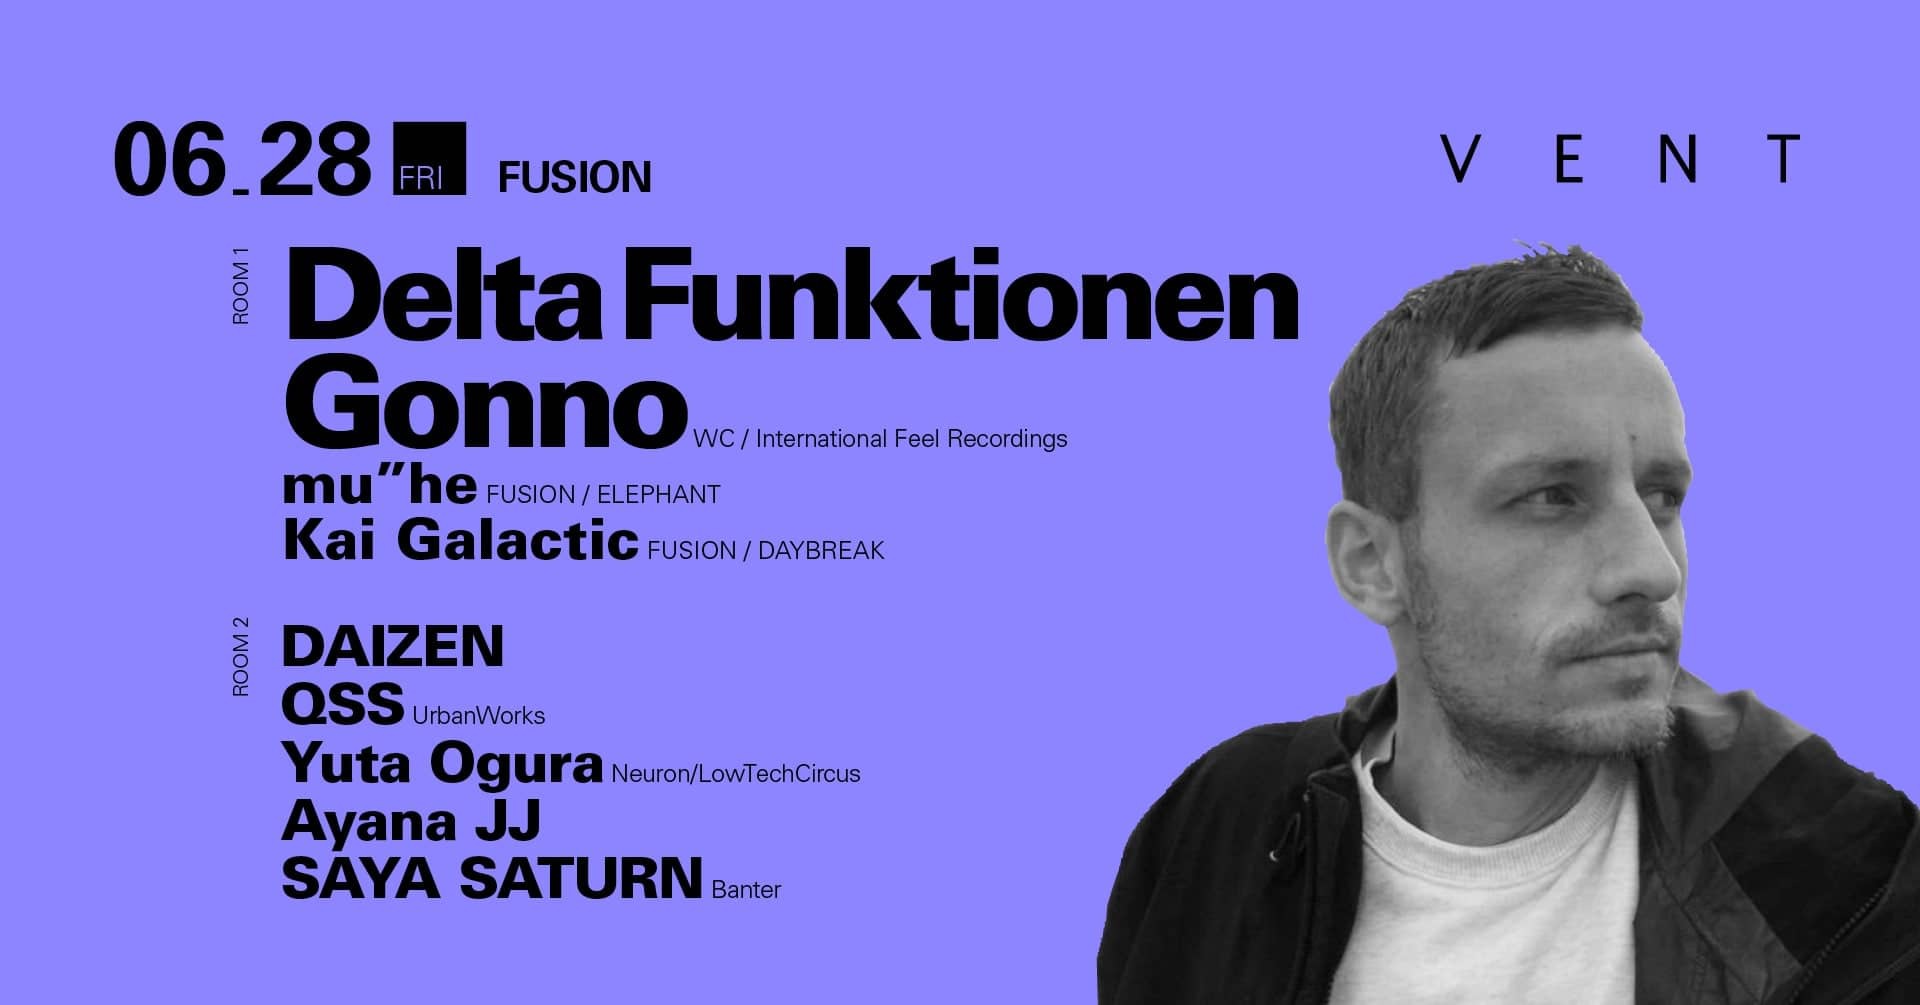 Delta Funktionen is set to play at nightclub VENT Omotesando on June 28th